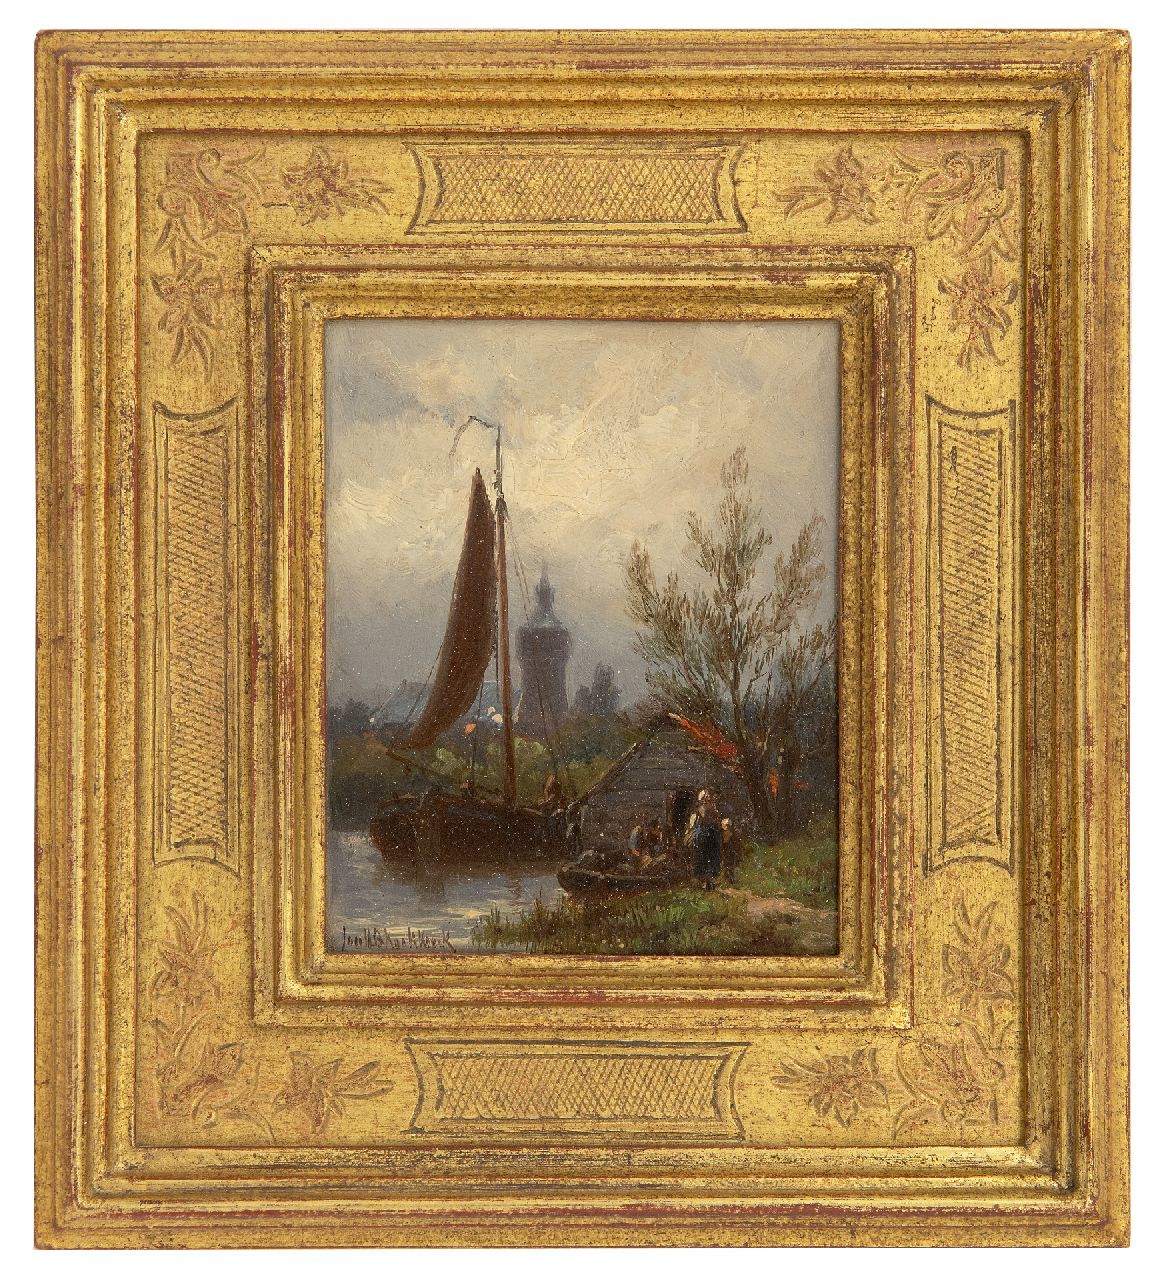 Koekkoek J.H.B.  | Johannes Hermanus Barend 'Jan H.B.' Koekkoek | Paintings offered for sale | A canal with barges and figures, oil on panel 11.4 x 9.3 cm, signed l.l.